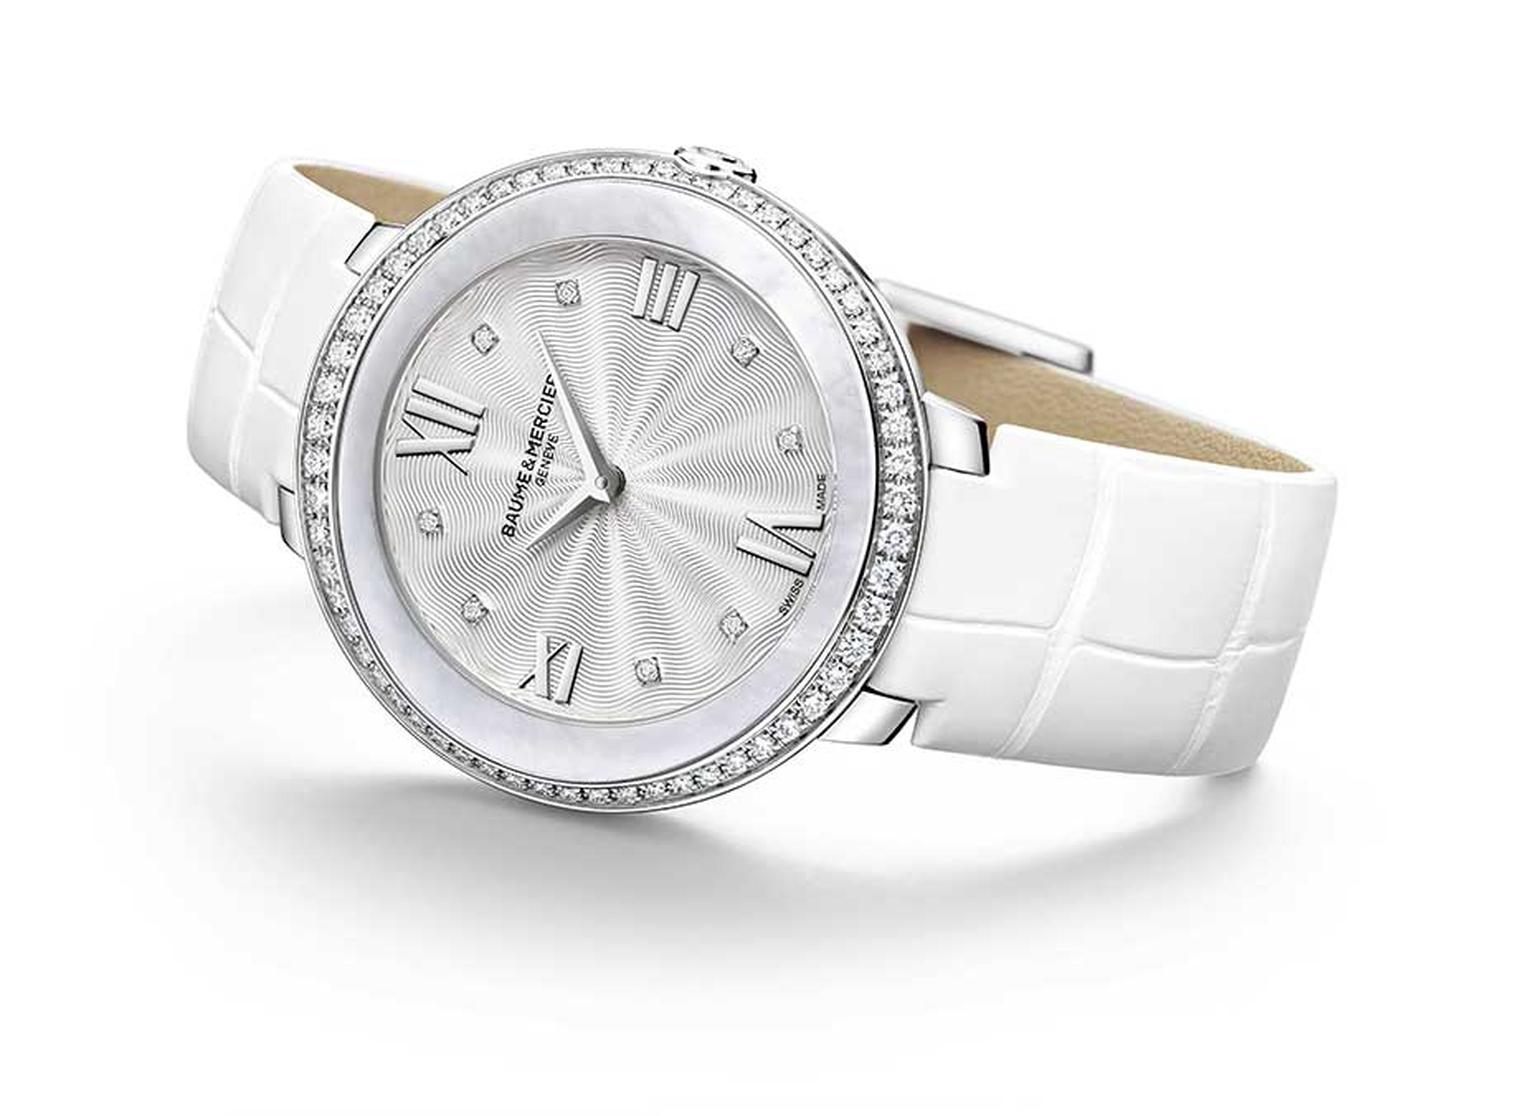 Baume & Mercier is showcasing its new ladies' collection called Promesse at the SIAR Madrid.